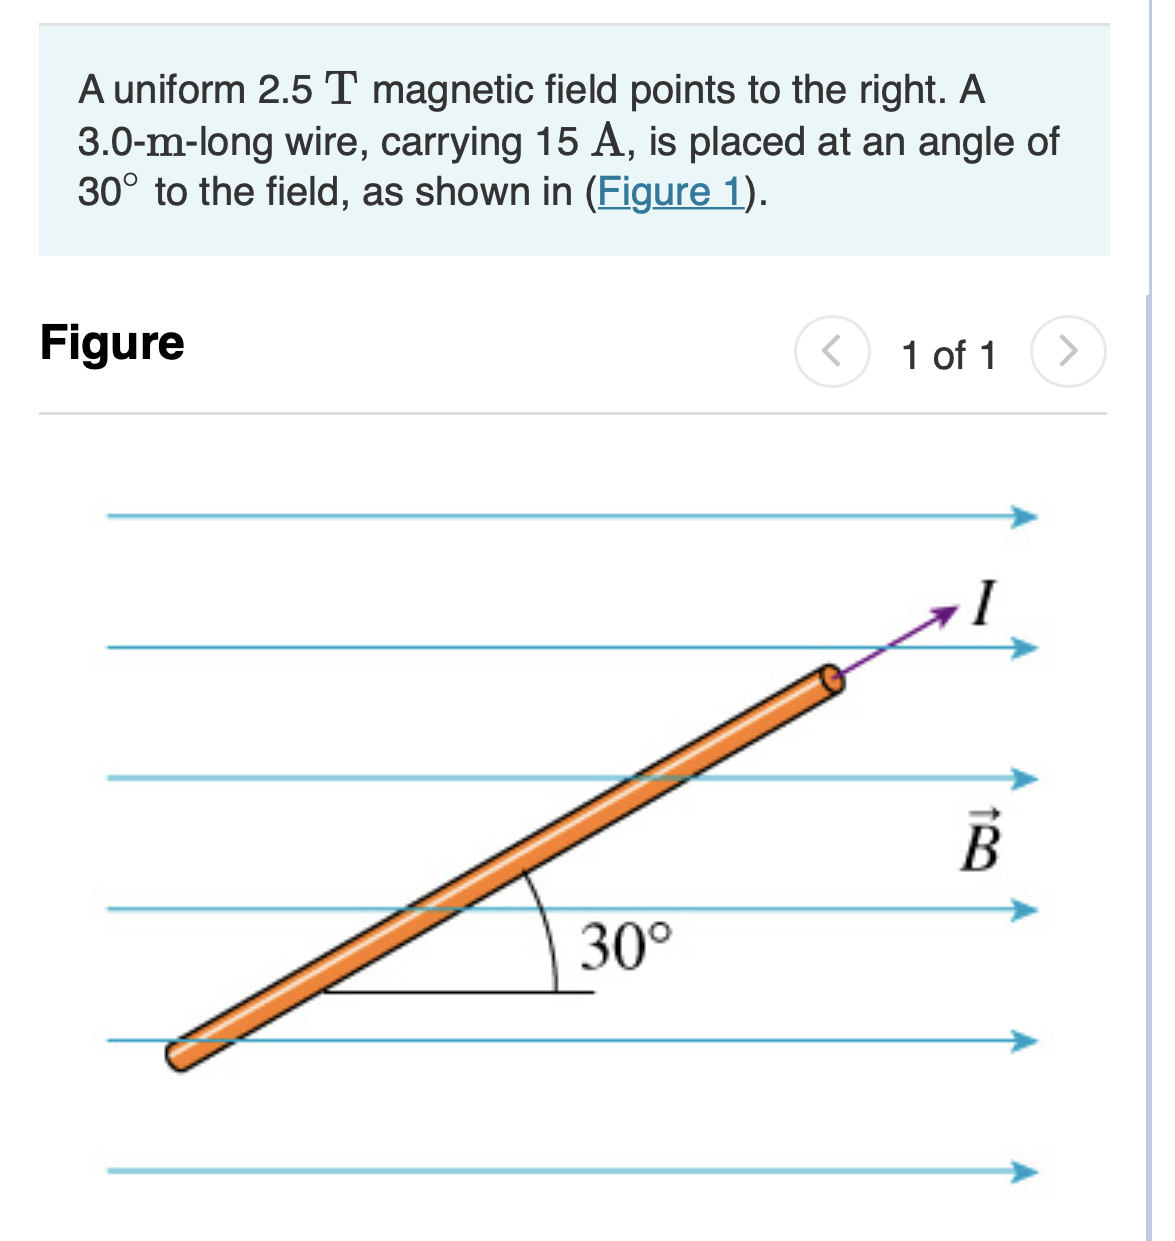 A uniform 2.5 T magnetic field points to the right. A
3.0-m-long wire, carrying 15 A, is placed at an angle of
30° to the field, as shown in (Figure 1).
Figure
1 of 1
30°
